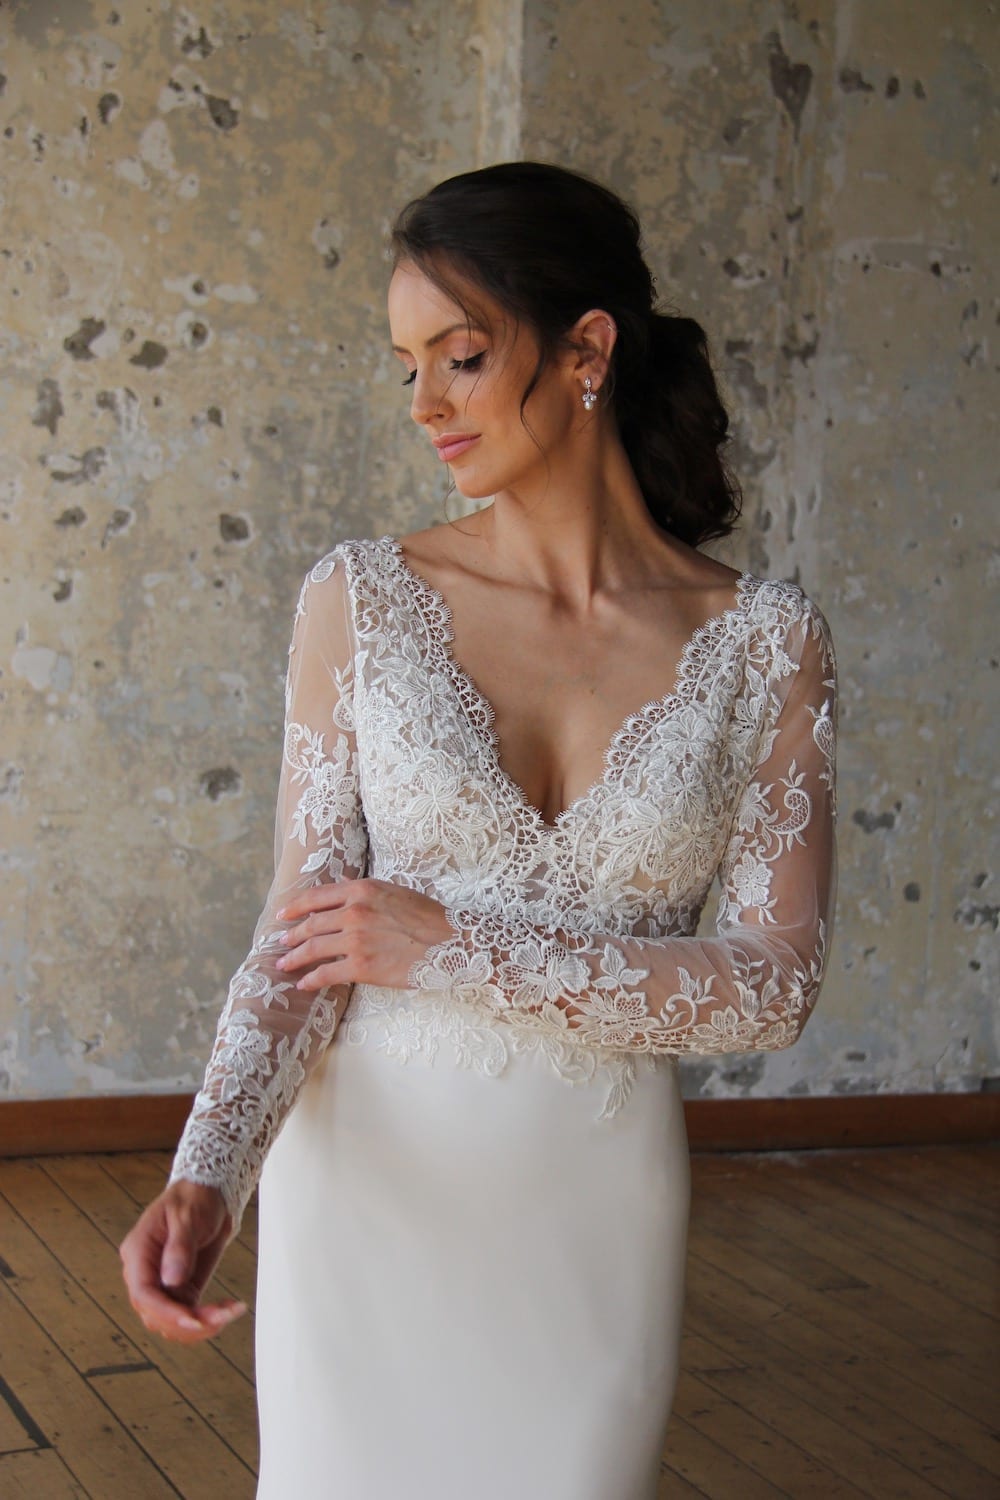 Female model wearing Vinka Design Modern Muse Wedding Dress. In chic warehouse the front detail of a gown with v-neckline, intricate bodice, long lace sleeves, and Bridal crepe skirt.